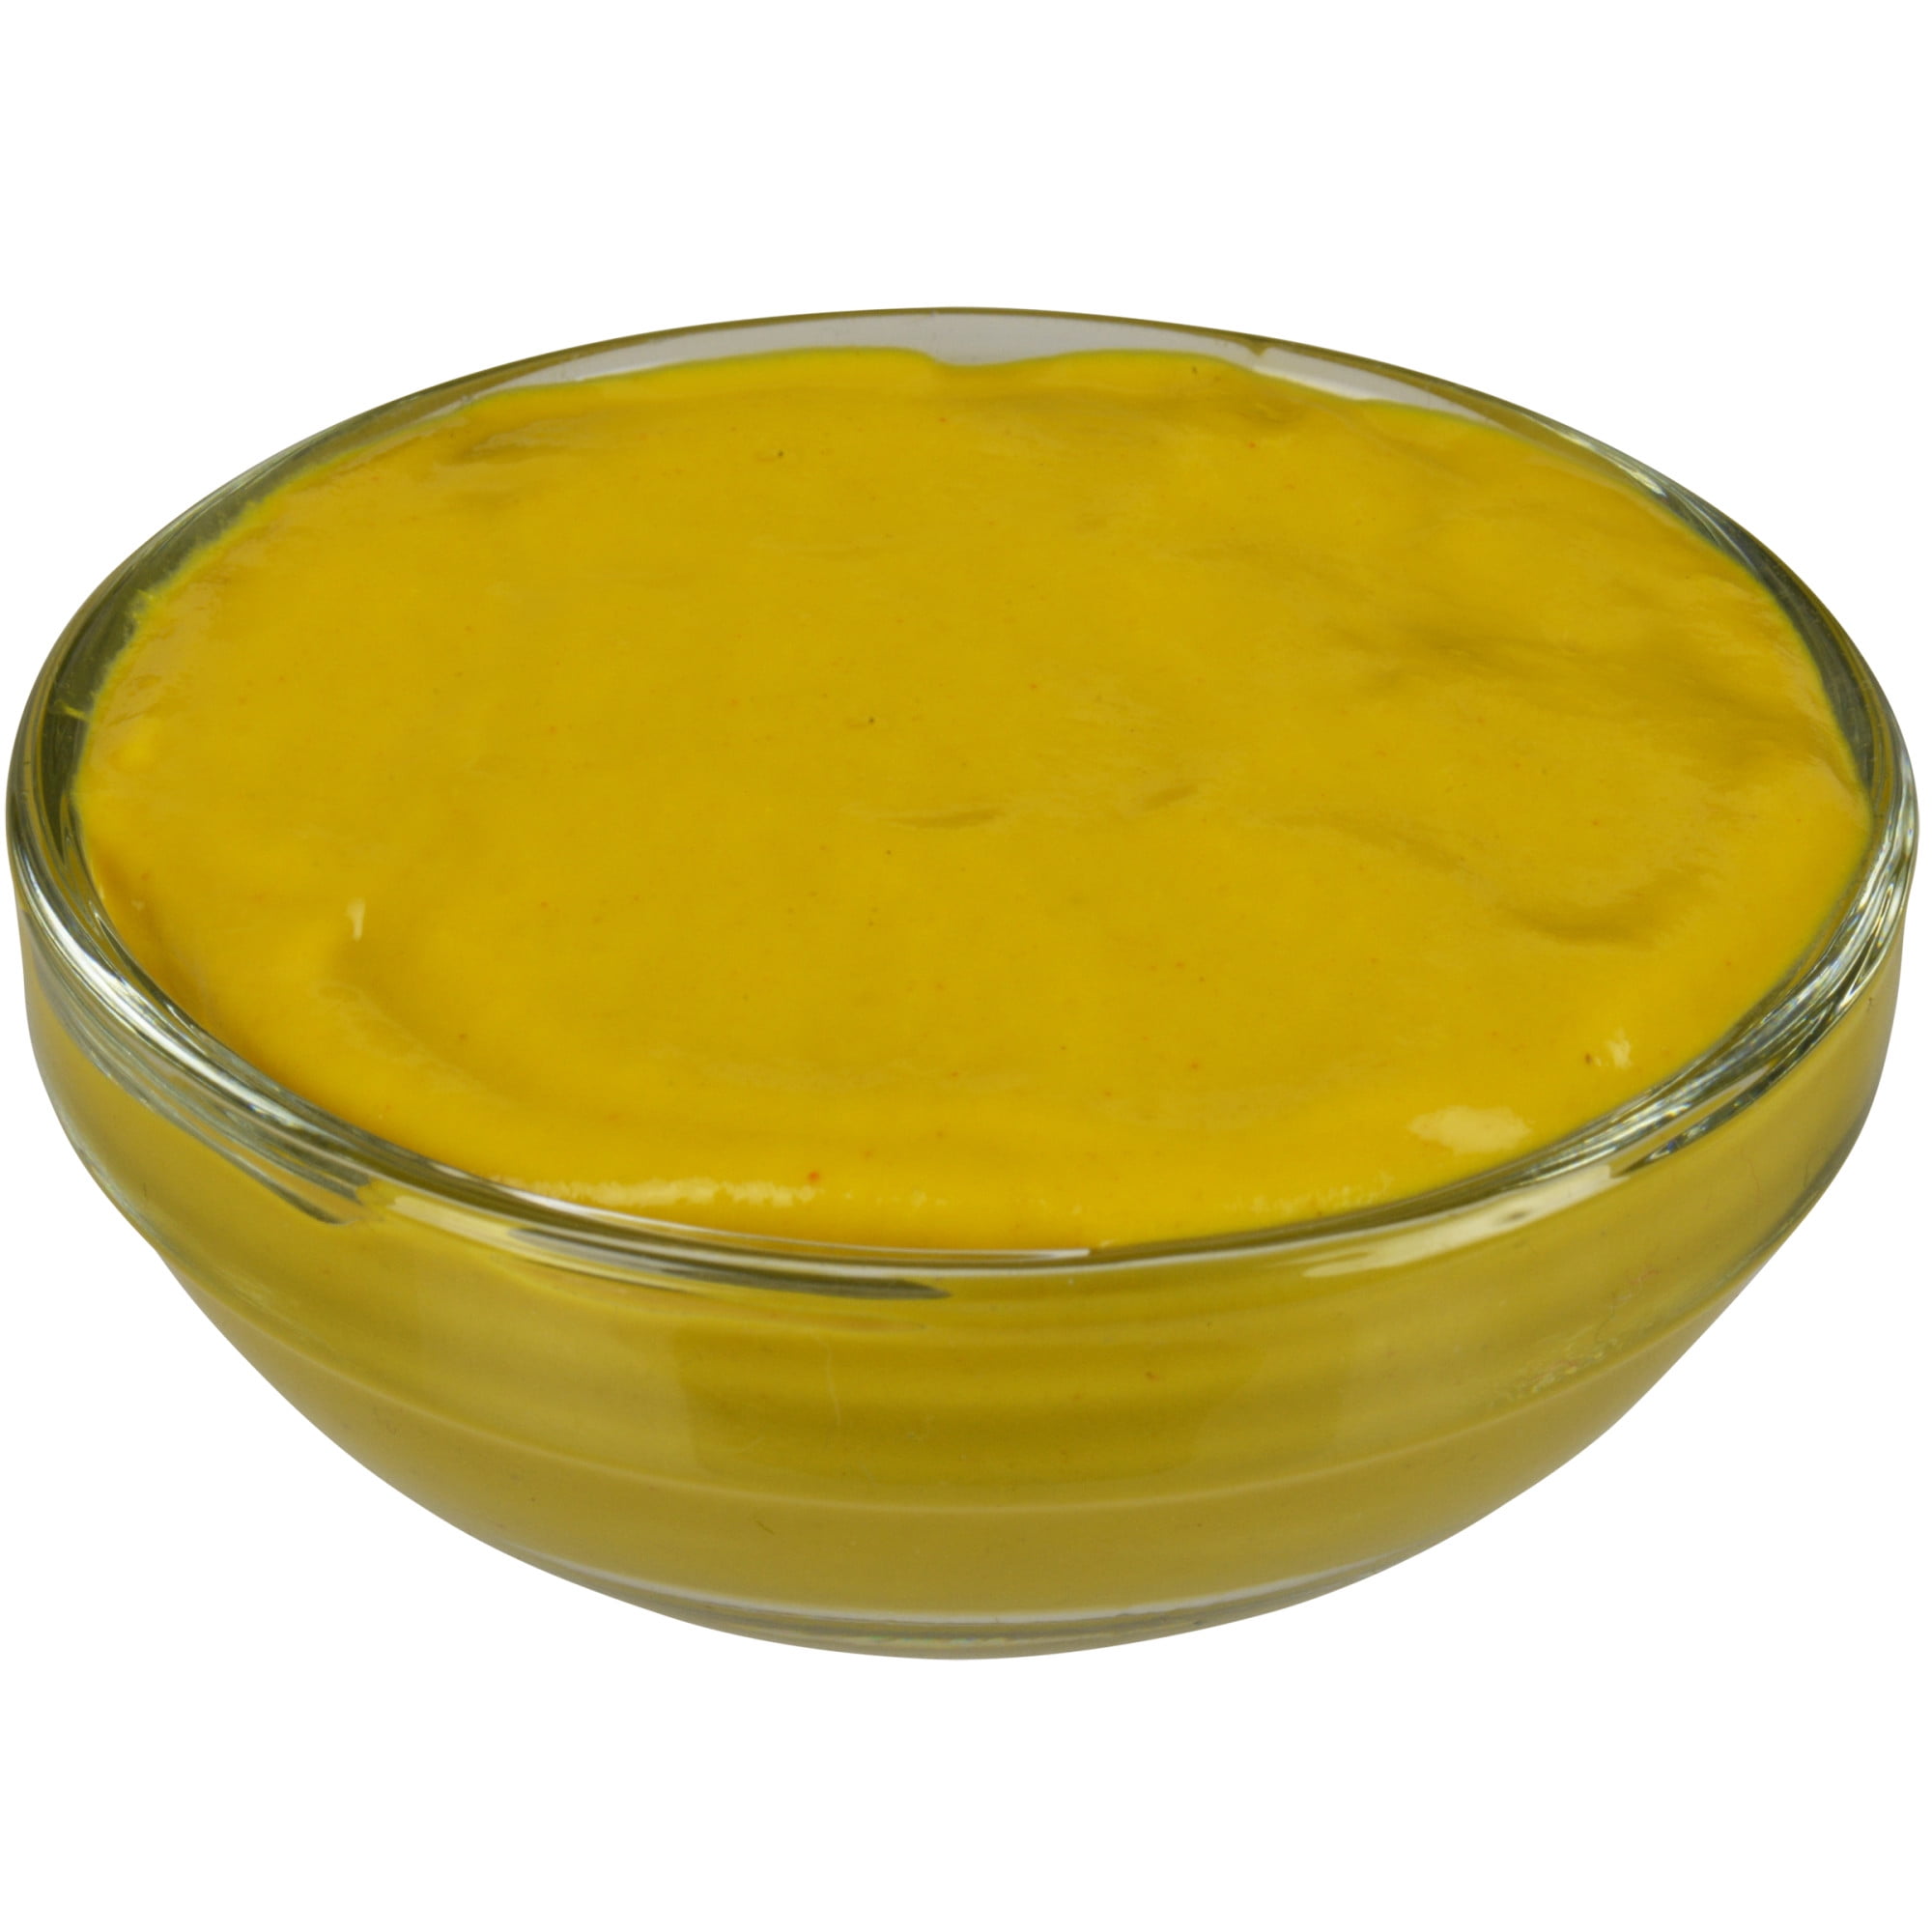 French's Classic Yellow Mustard, 105 oz Mustards - image 3 of 12